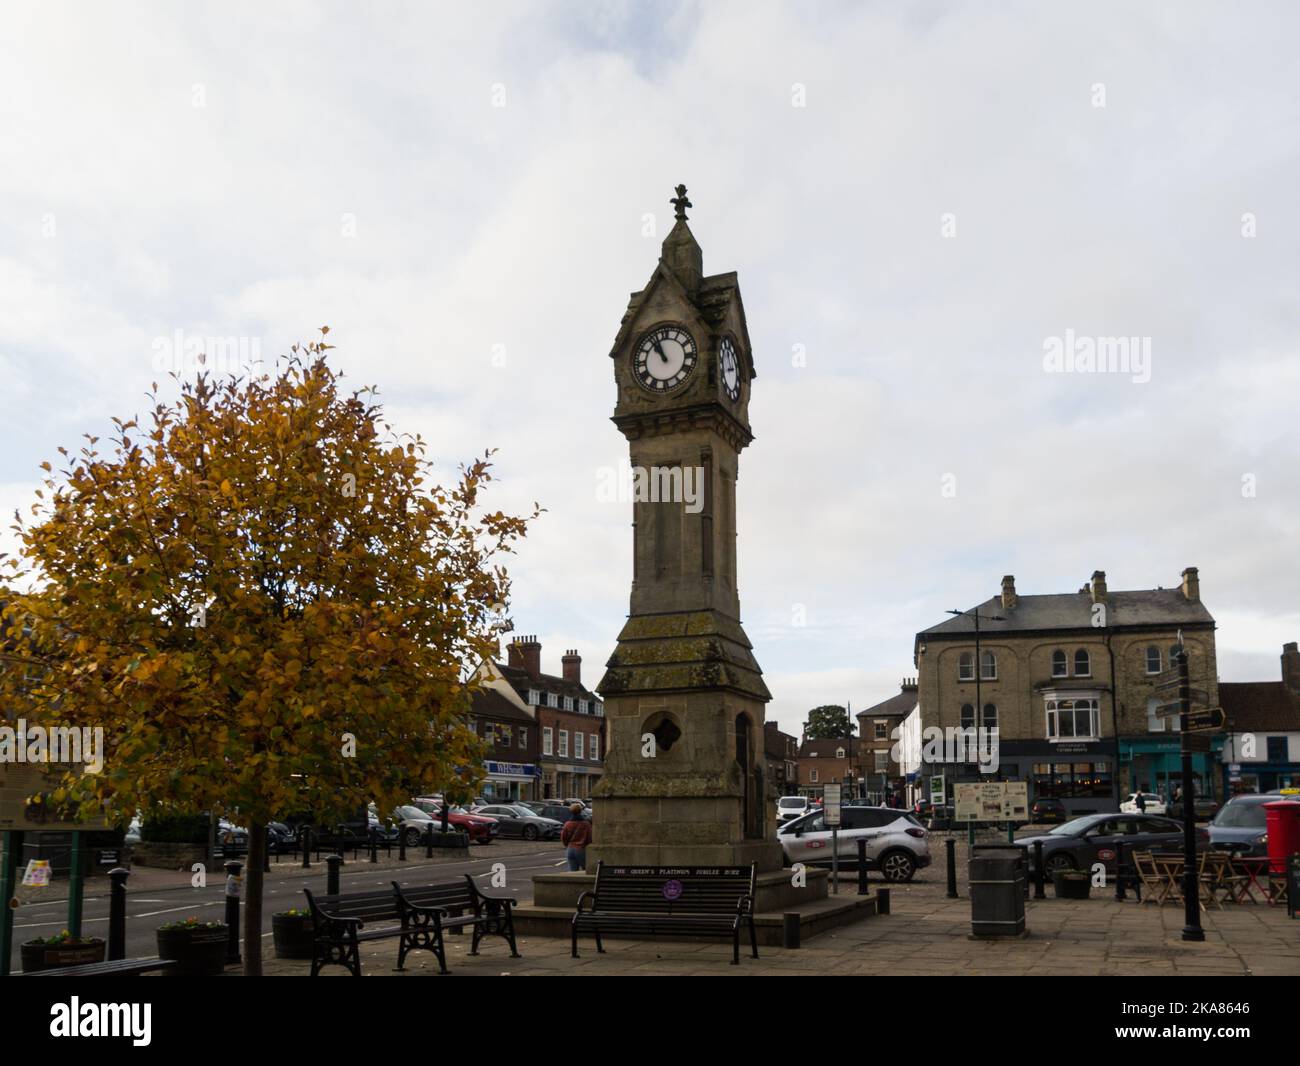 Clock Tower in Thirsk Market Place centre of North Yorkshire Market town England UK looking towards Bianco Restaurant town depicted as Darrowby Stock Photo